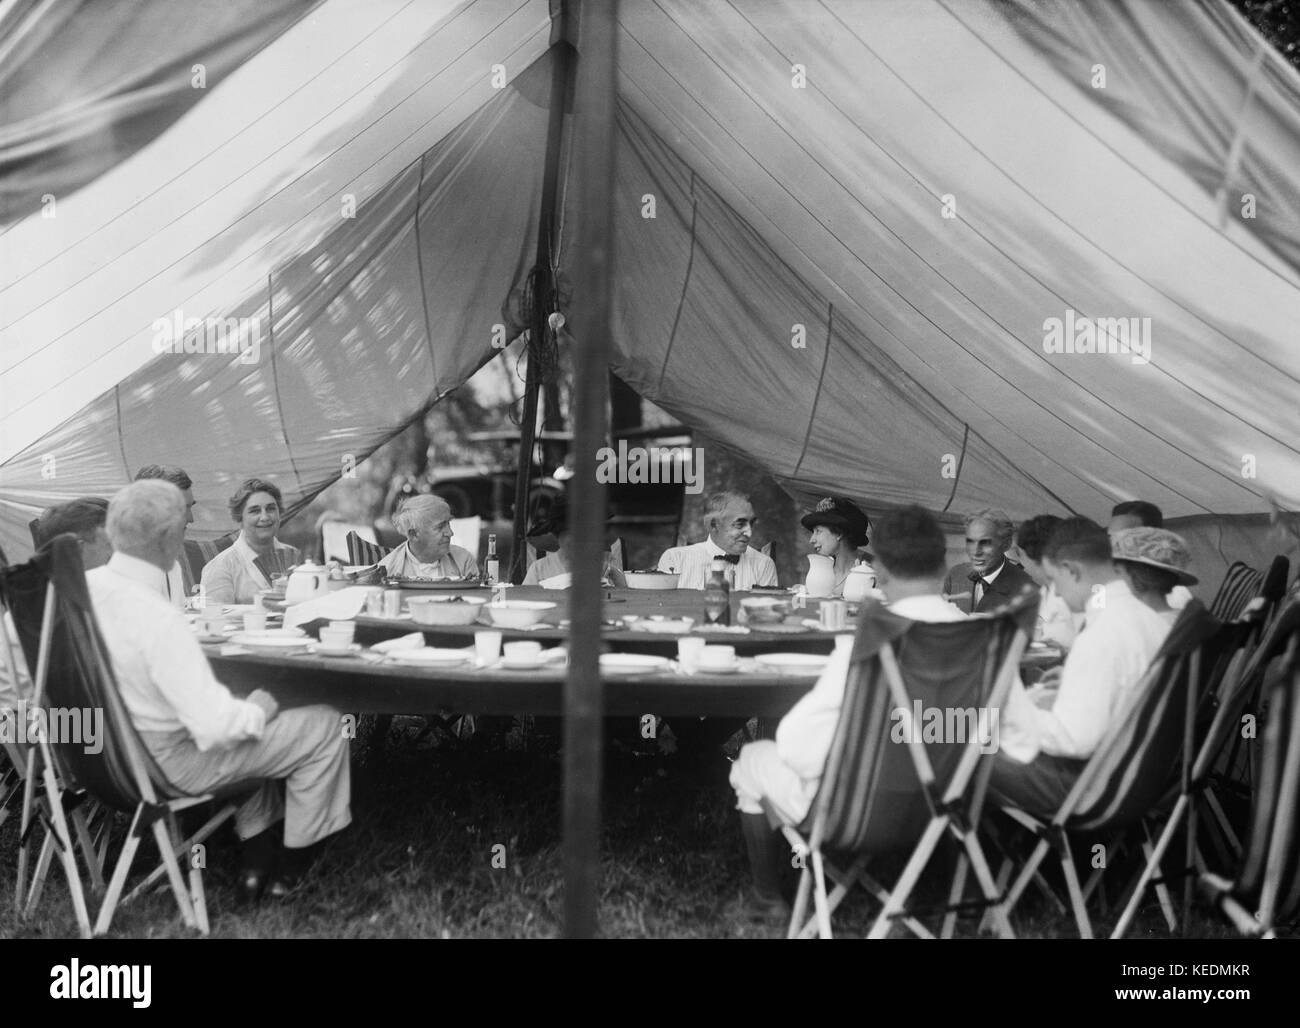 Thomas Edison,U.S. President Warren Harding,Henry Ford,and Families Having Lunch under Tent at Campsite,Maryland,USA,Harris & Ewing,1921 Stock Photo